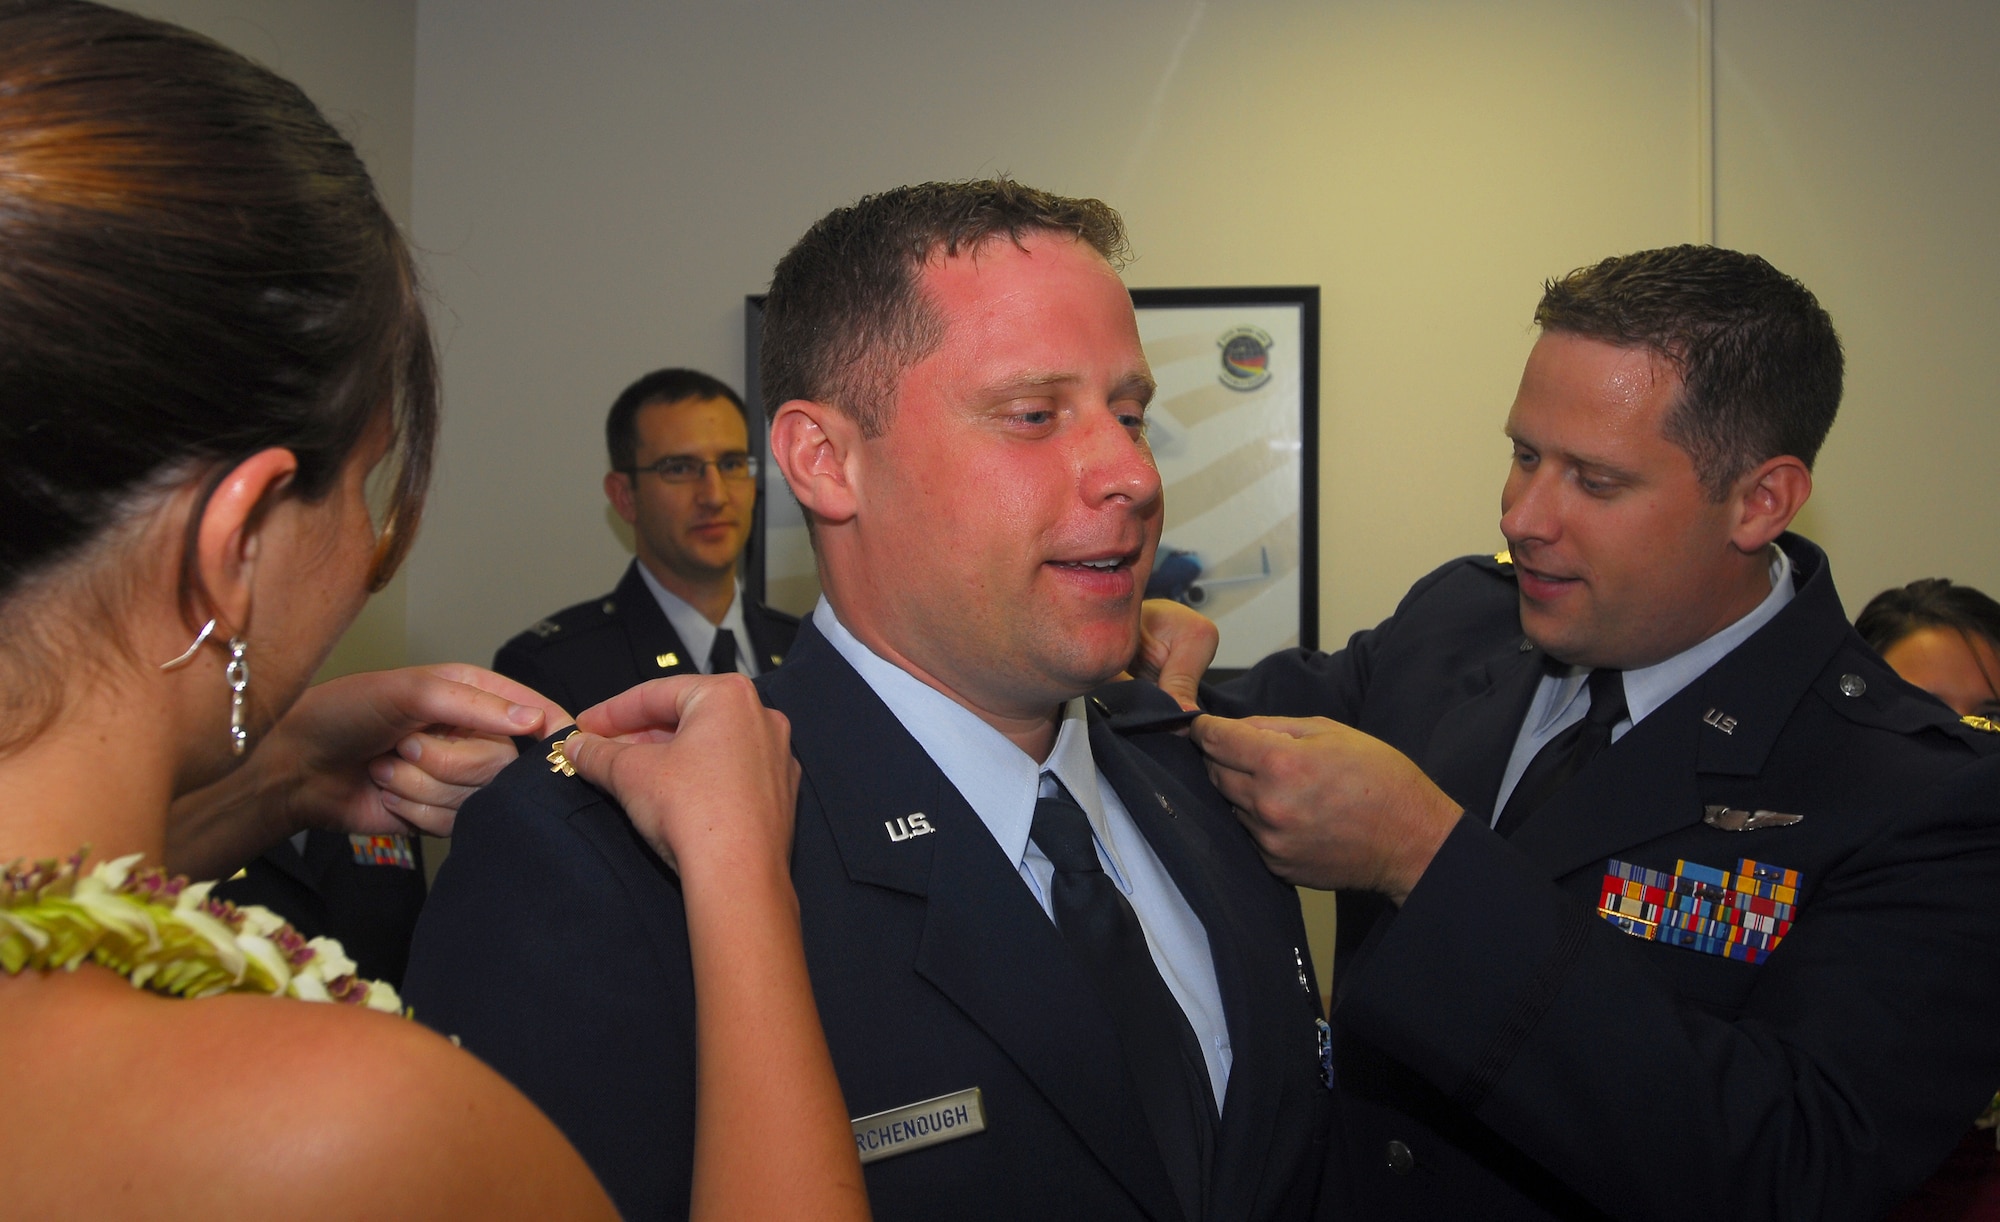 MacKenzie Collatz (left) and newly promoted Maj. Peter Birchenough (right), 65th Airlift Squadron pin the rank of Major on Dennis Birchenough, Air Force Institute of Technology, during a promotion ceremony at the 65th Airlift Squadron conference room.  The majors are identical twins who were promoted to Major on the same day. 